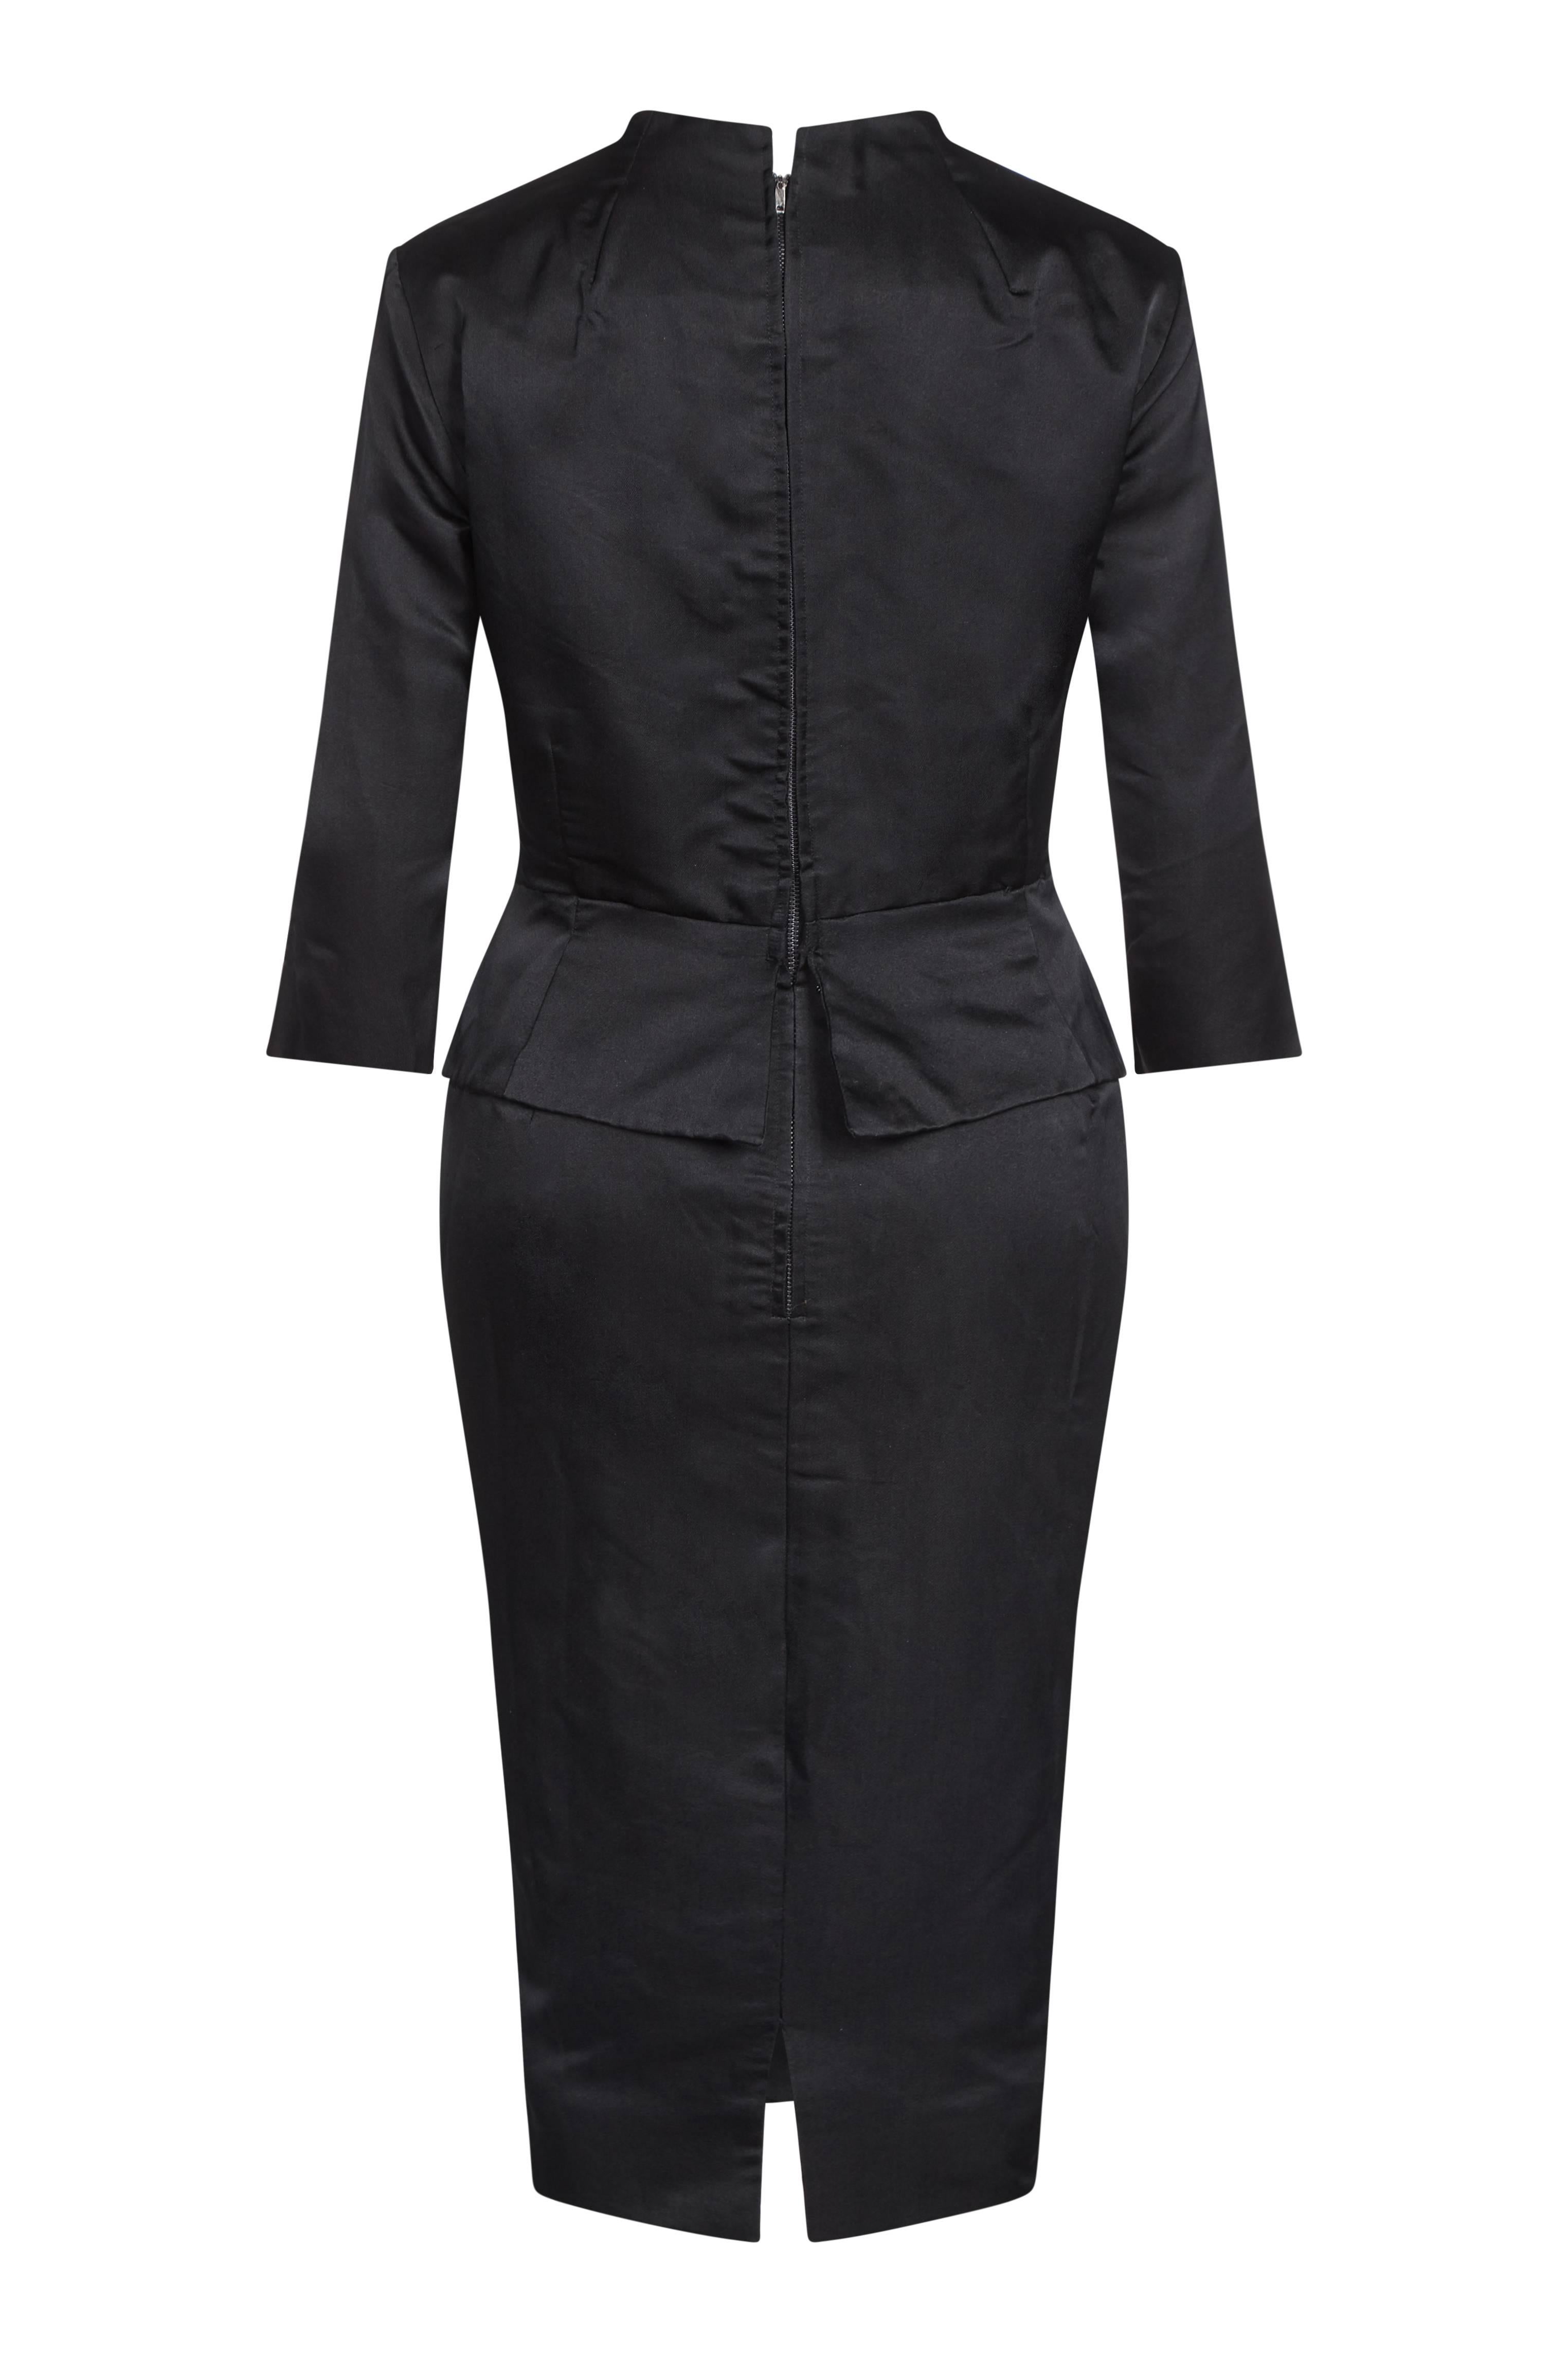 This stylish 1950s black silk evening dress is a stunning combination of design features, achieving a deeply glamorous yet formal evening look. The mid-length sleeves and peplum detail in addition to skilled tailoring at the waist and hip creates a